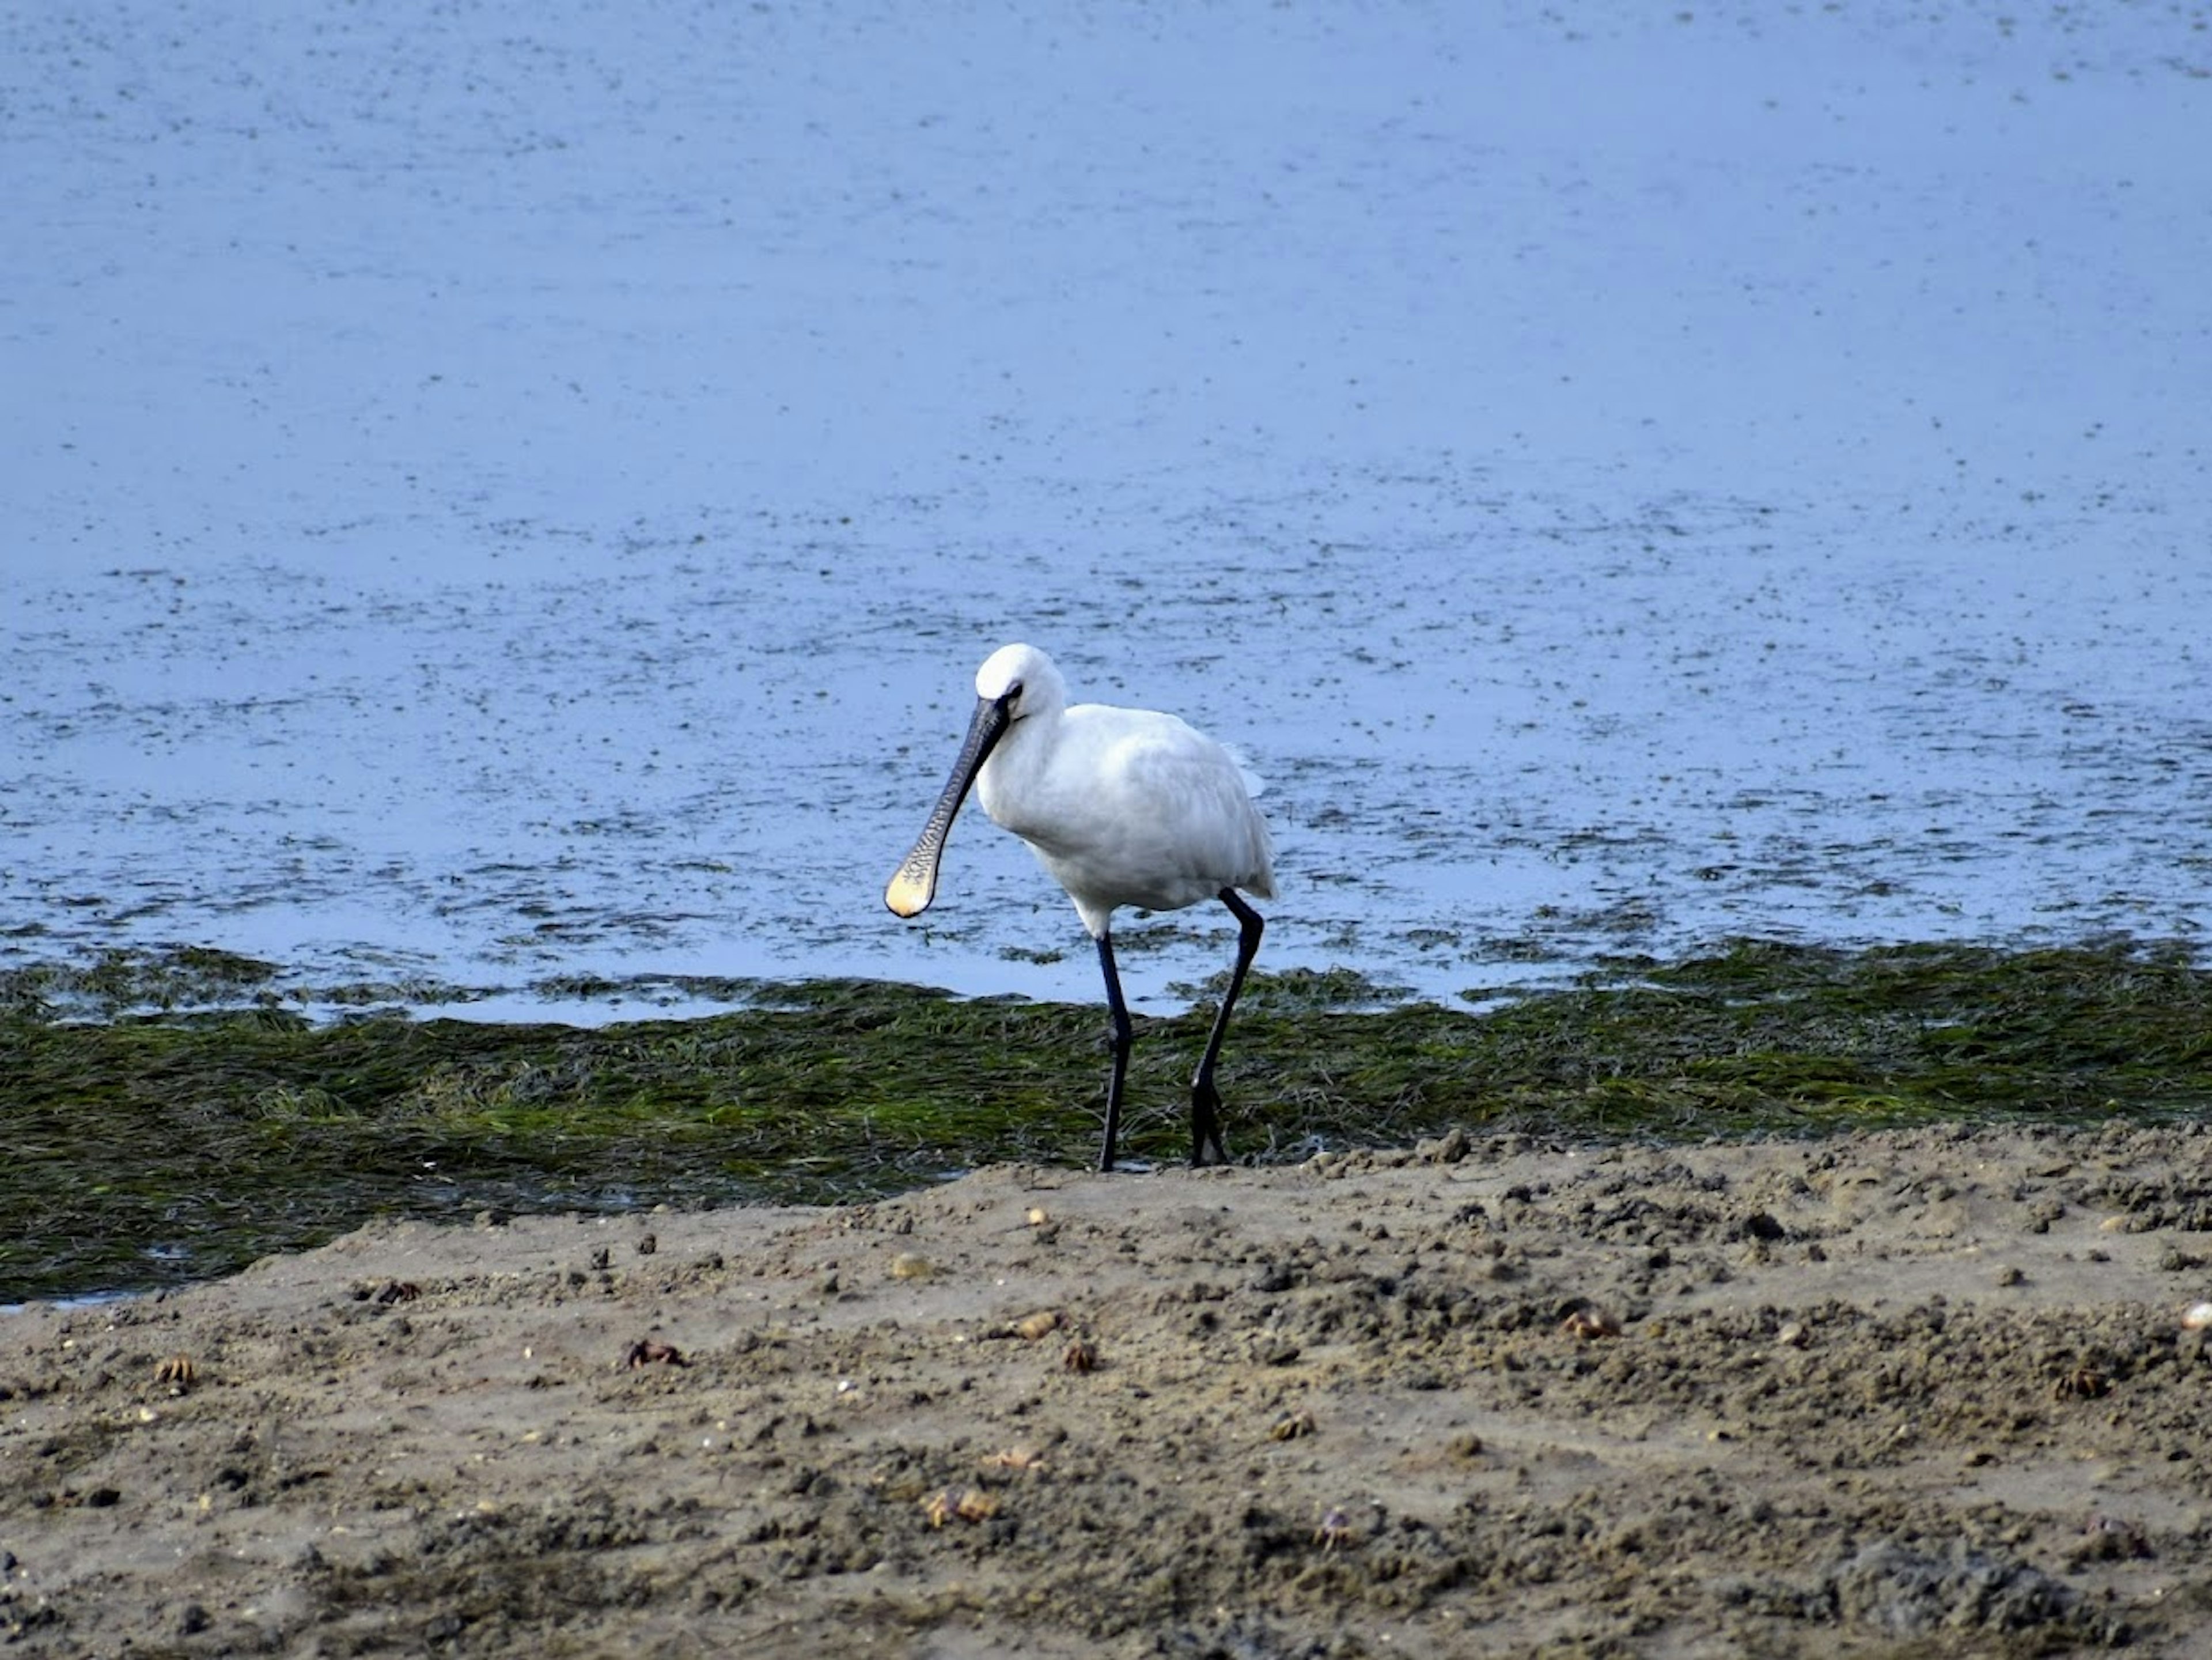 What kind of cereal do you think a spoonbill would it with its spoonbill if a spoonbill could eat cereal?